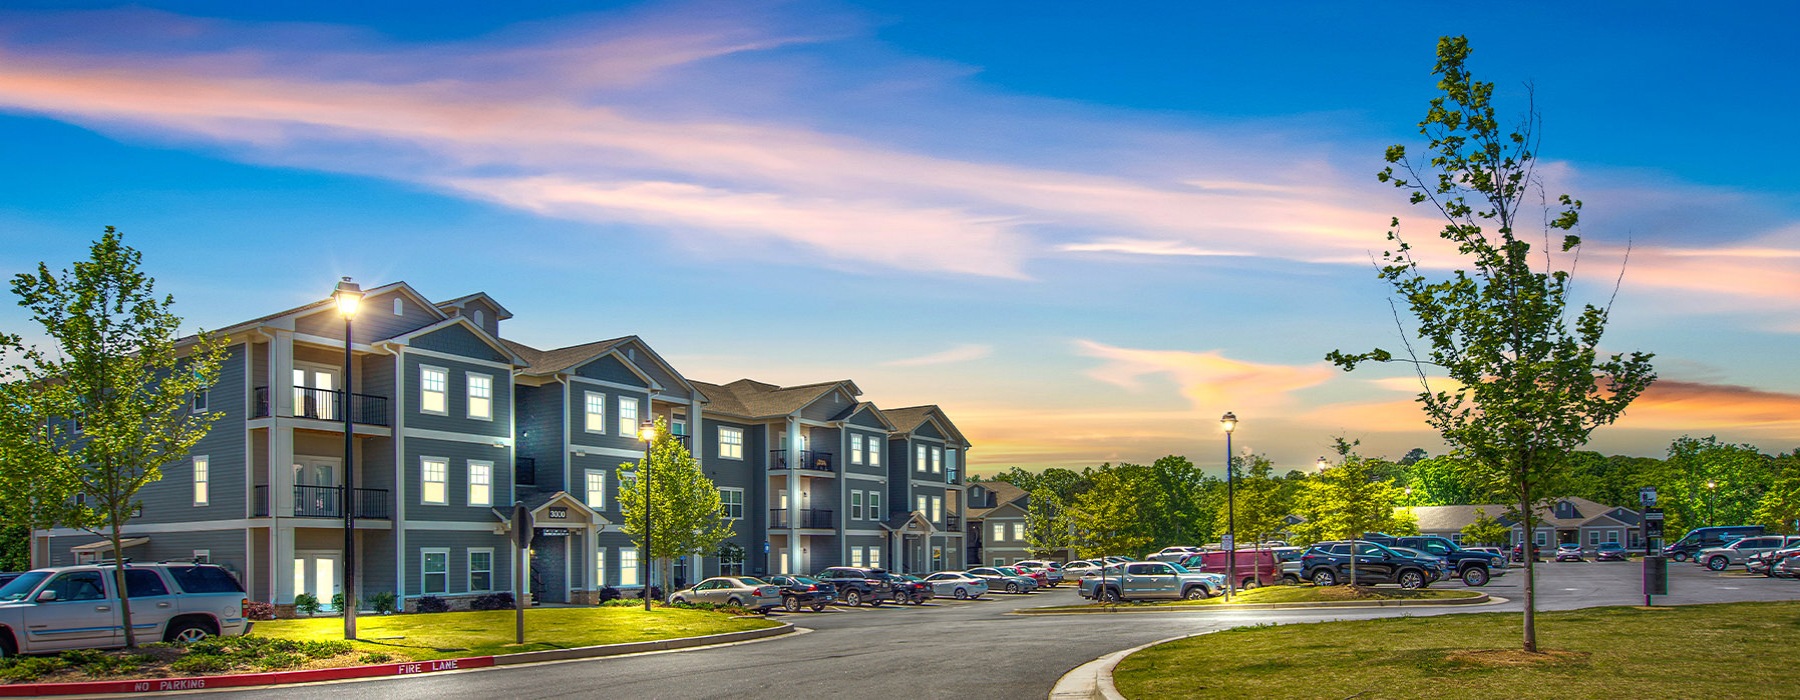 Exterior view of the apartments during sunset